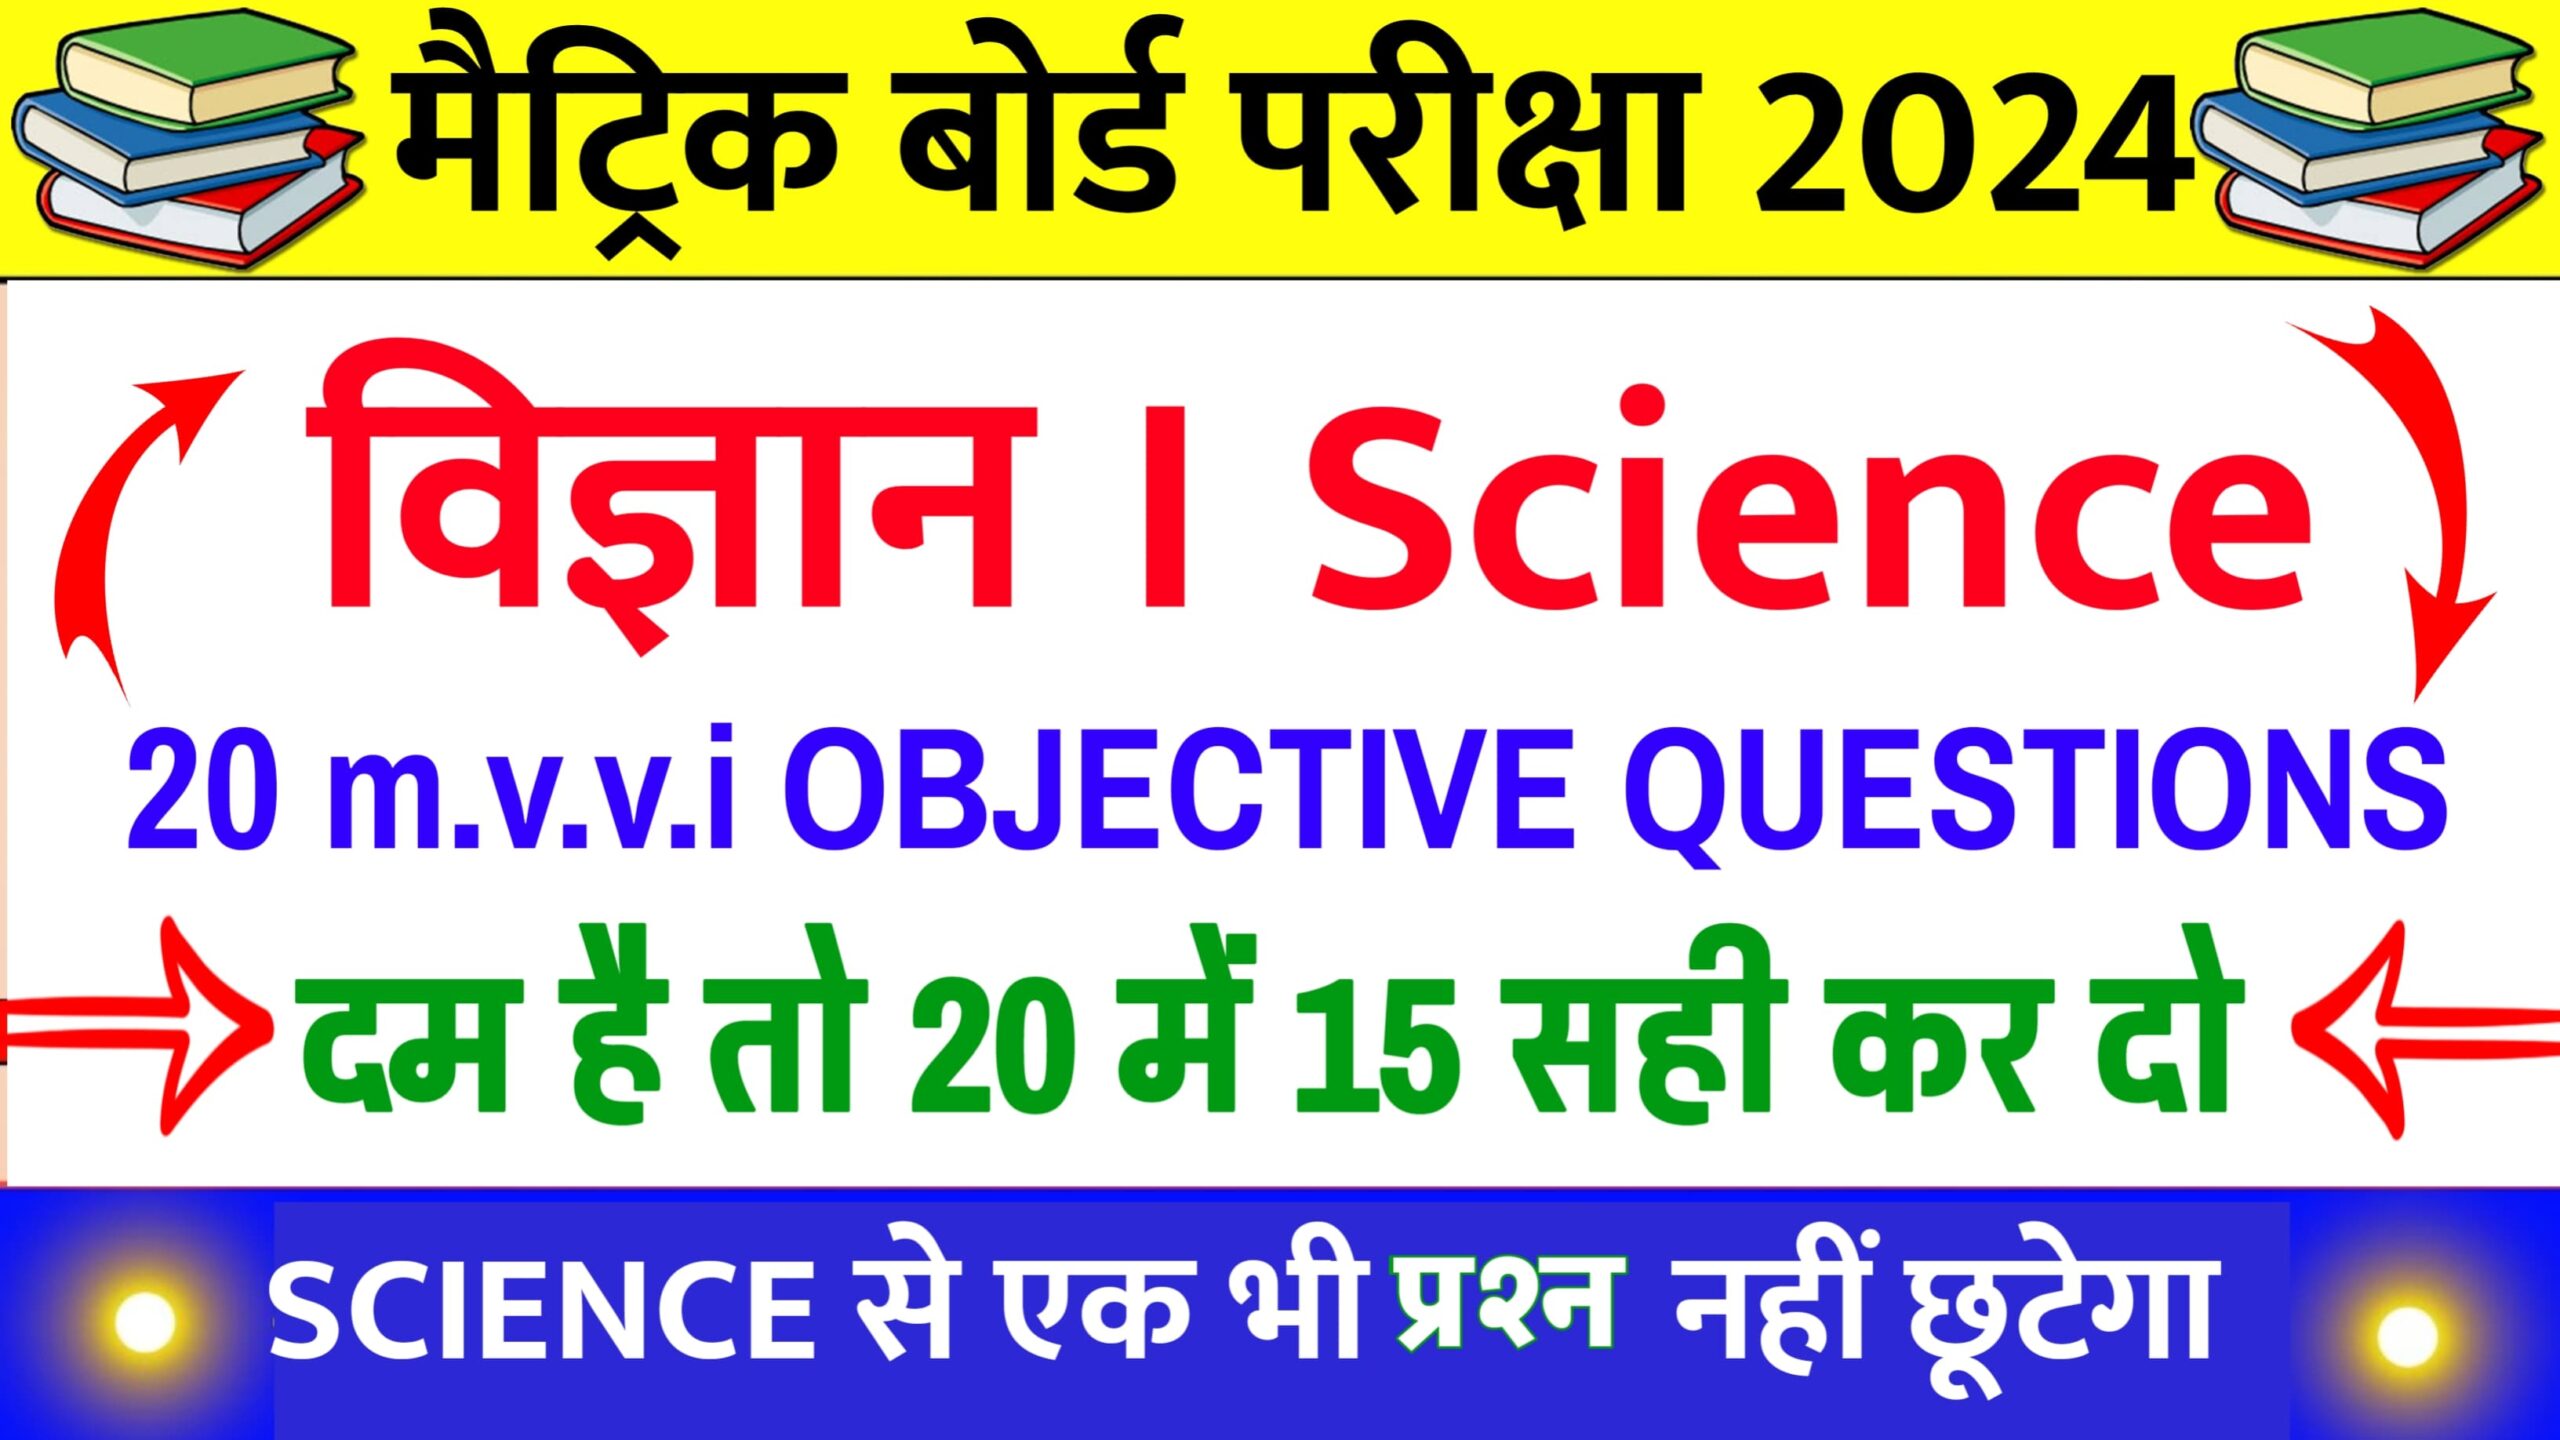 Class 10th science bseb online test 2024 pdf